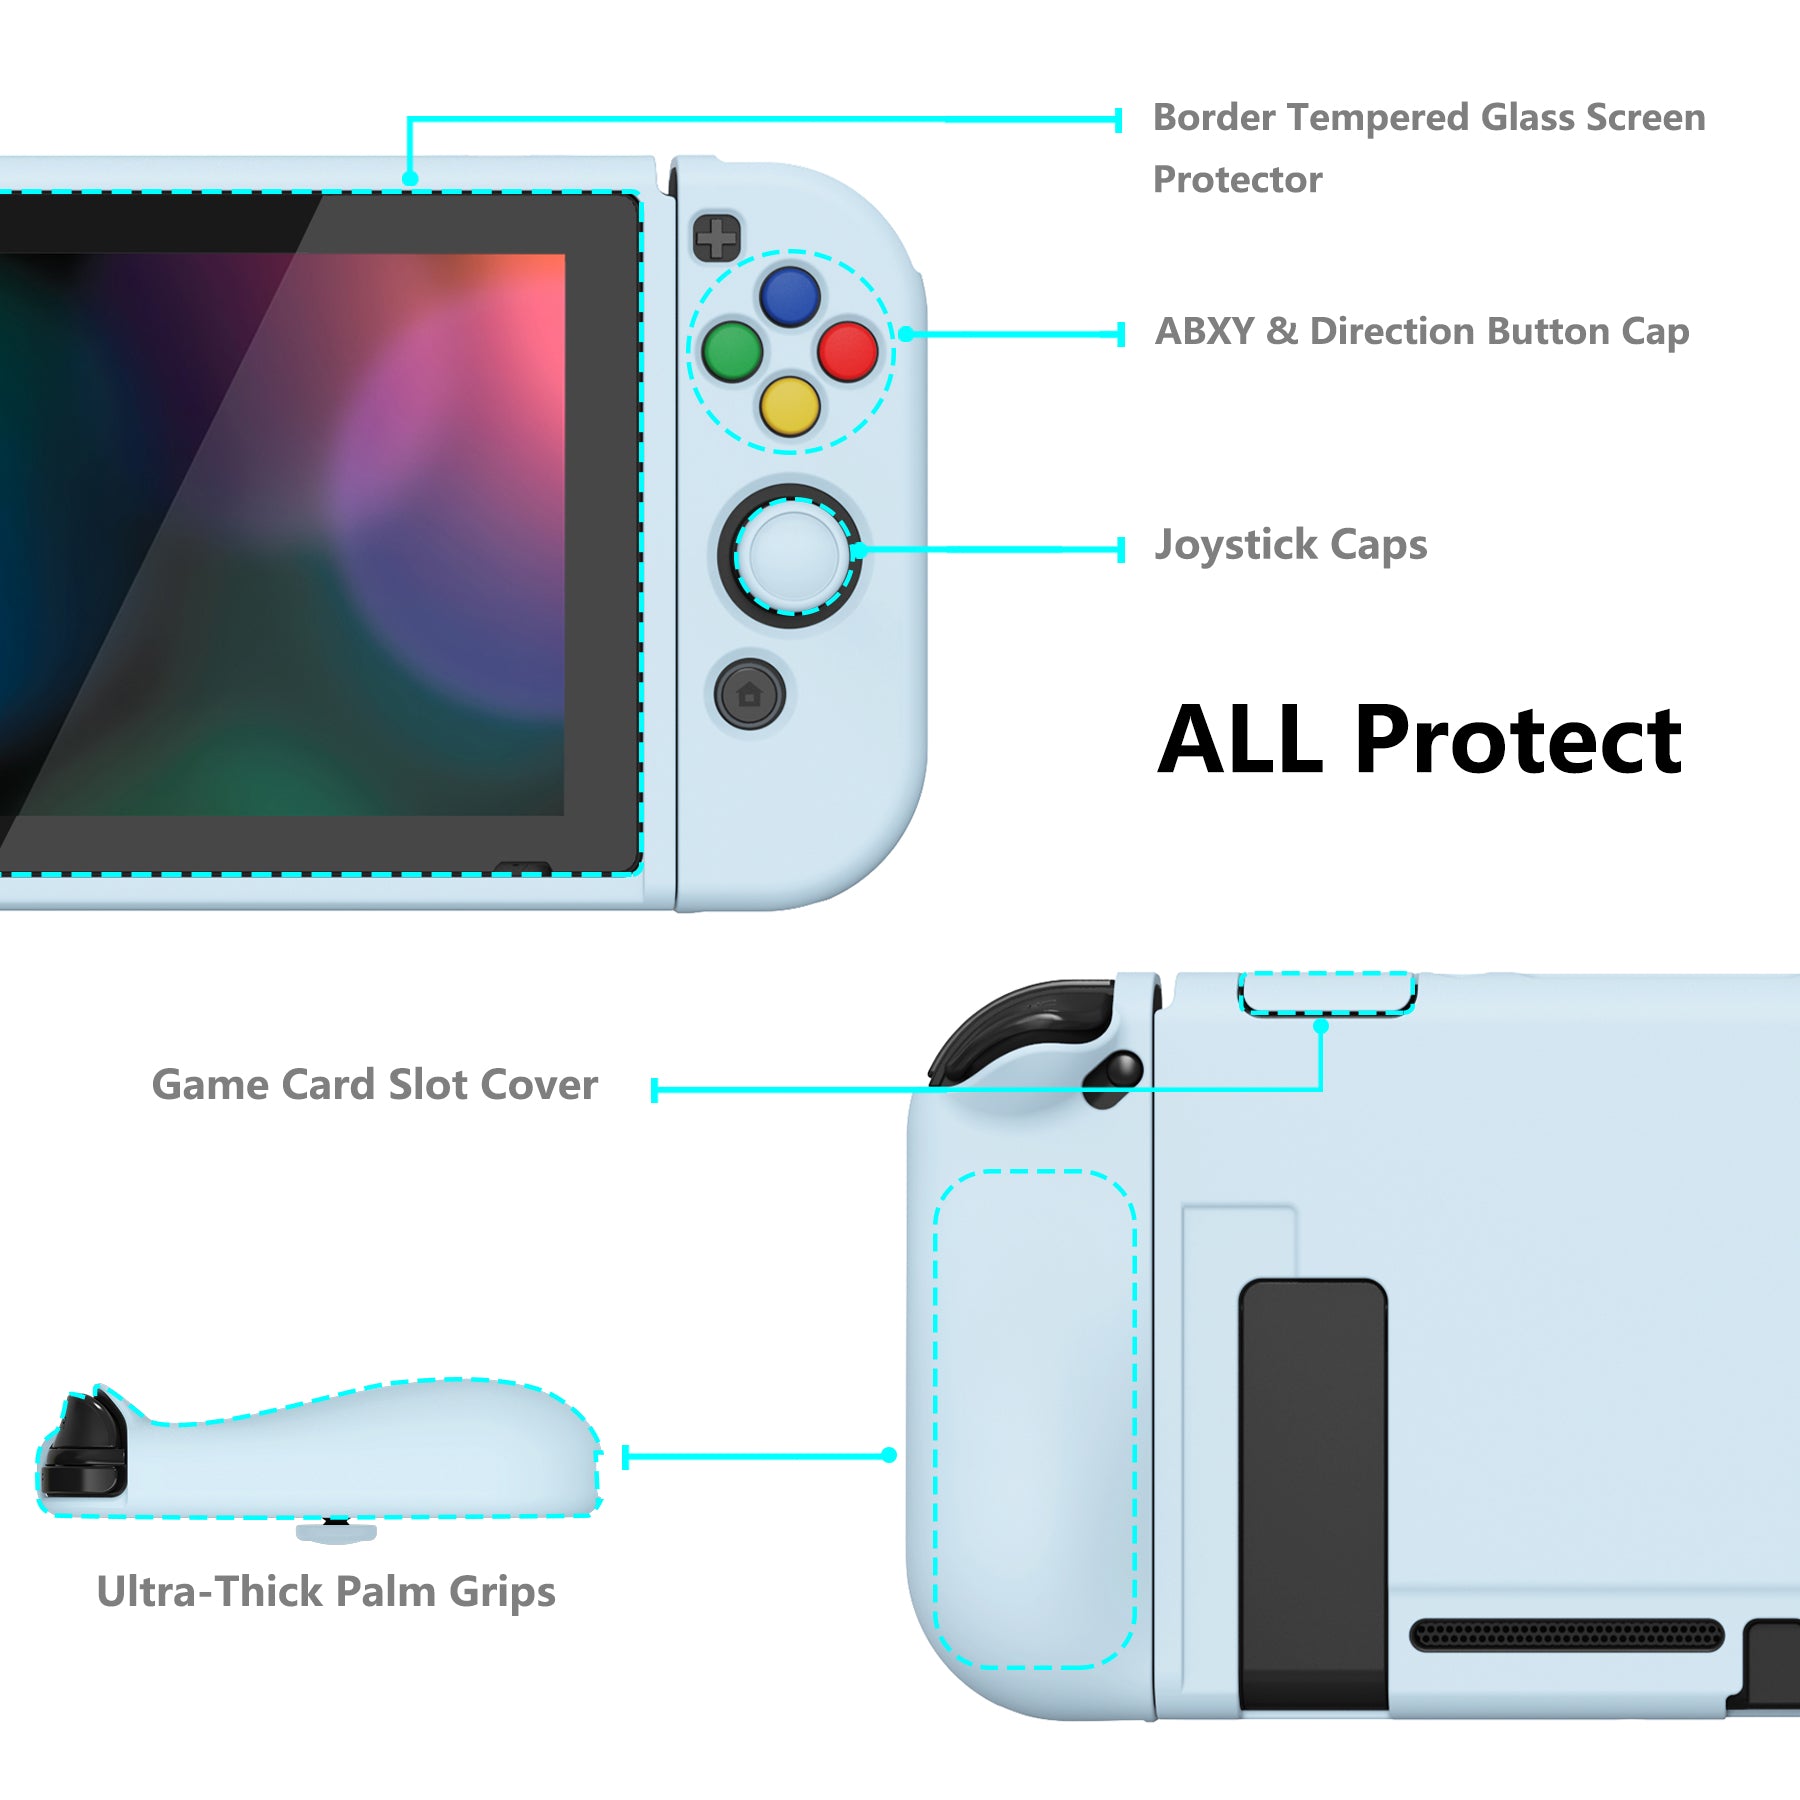 PlayVital ZealProtect Soft Protective Case for Nintendo Switch, Flexible Cover for Switch with Tempered Glass Screen Protector & Thumb Grips & ABXY Direction Button Caps - Santa Deer - RNSYV6052 playvital